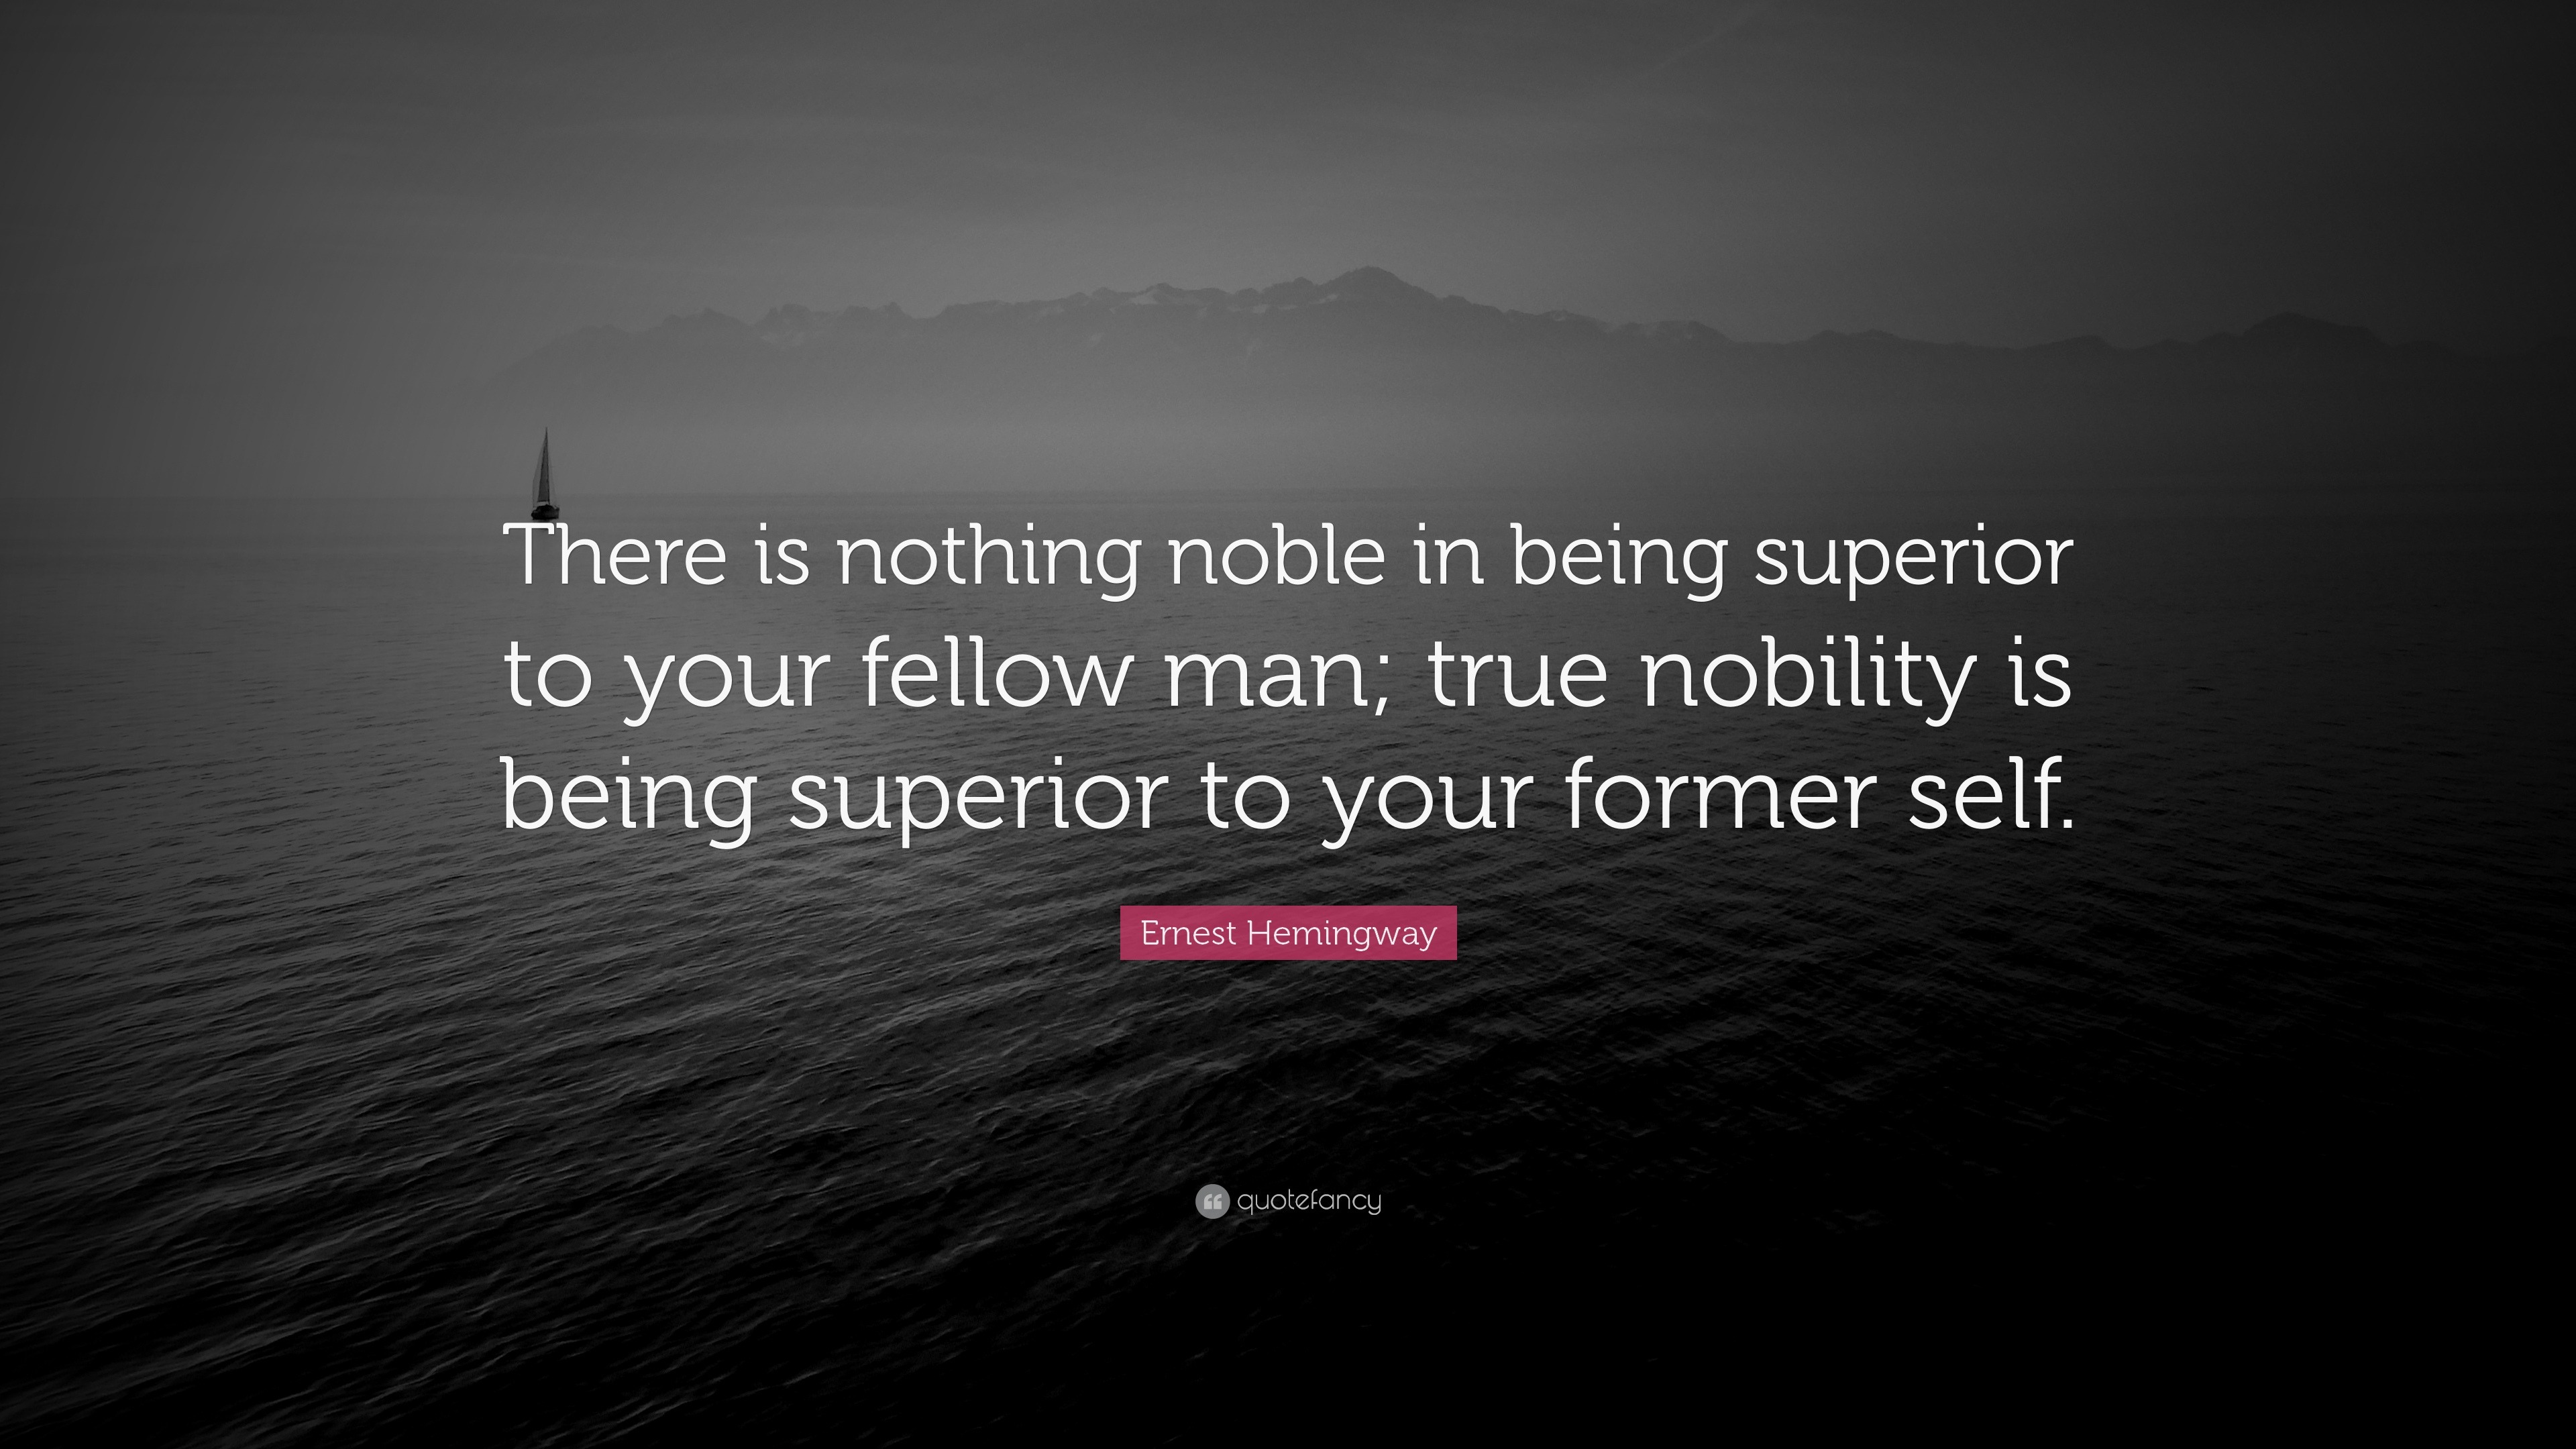 noble in being superior to your fellow man; true nobility is